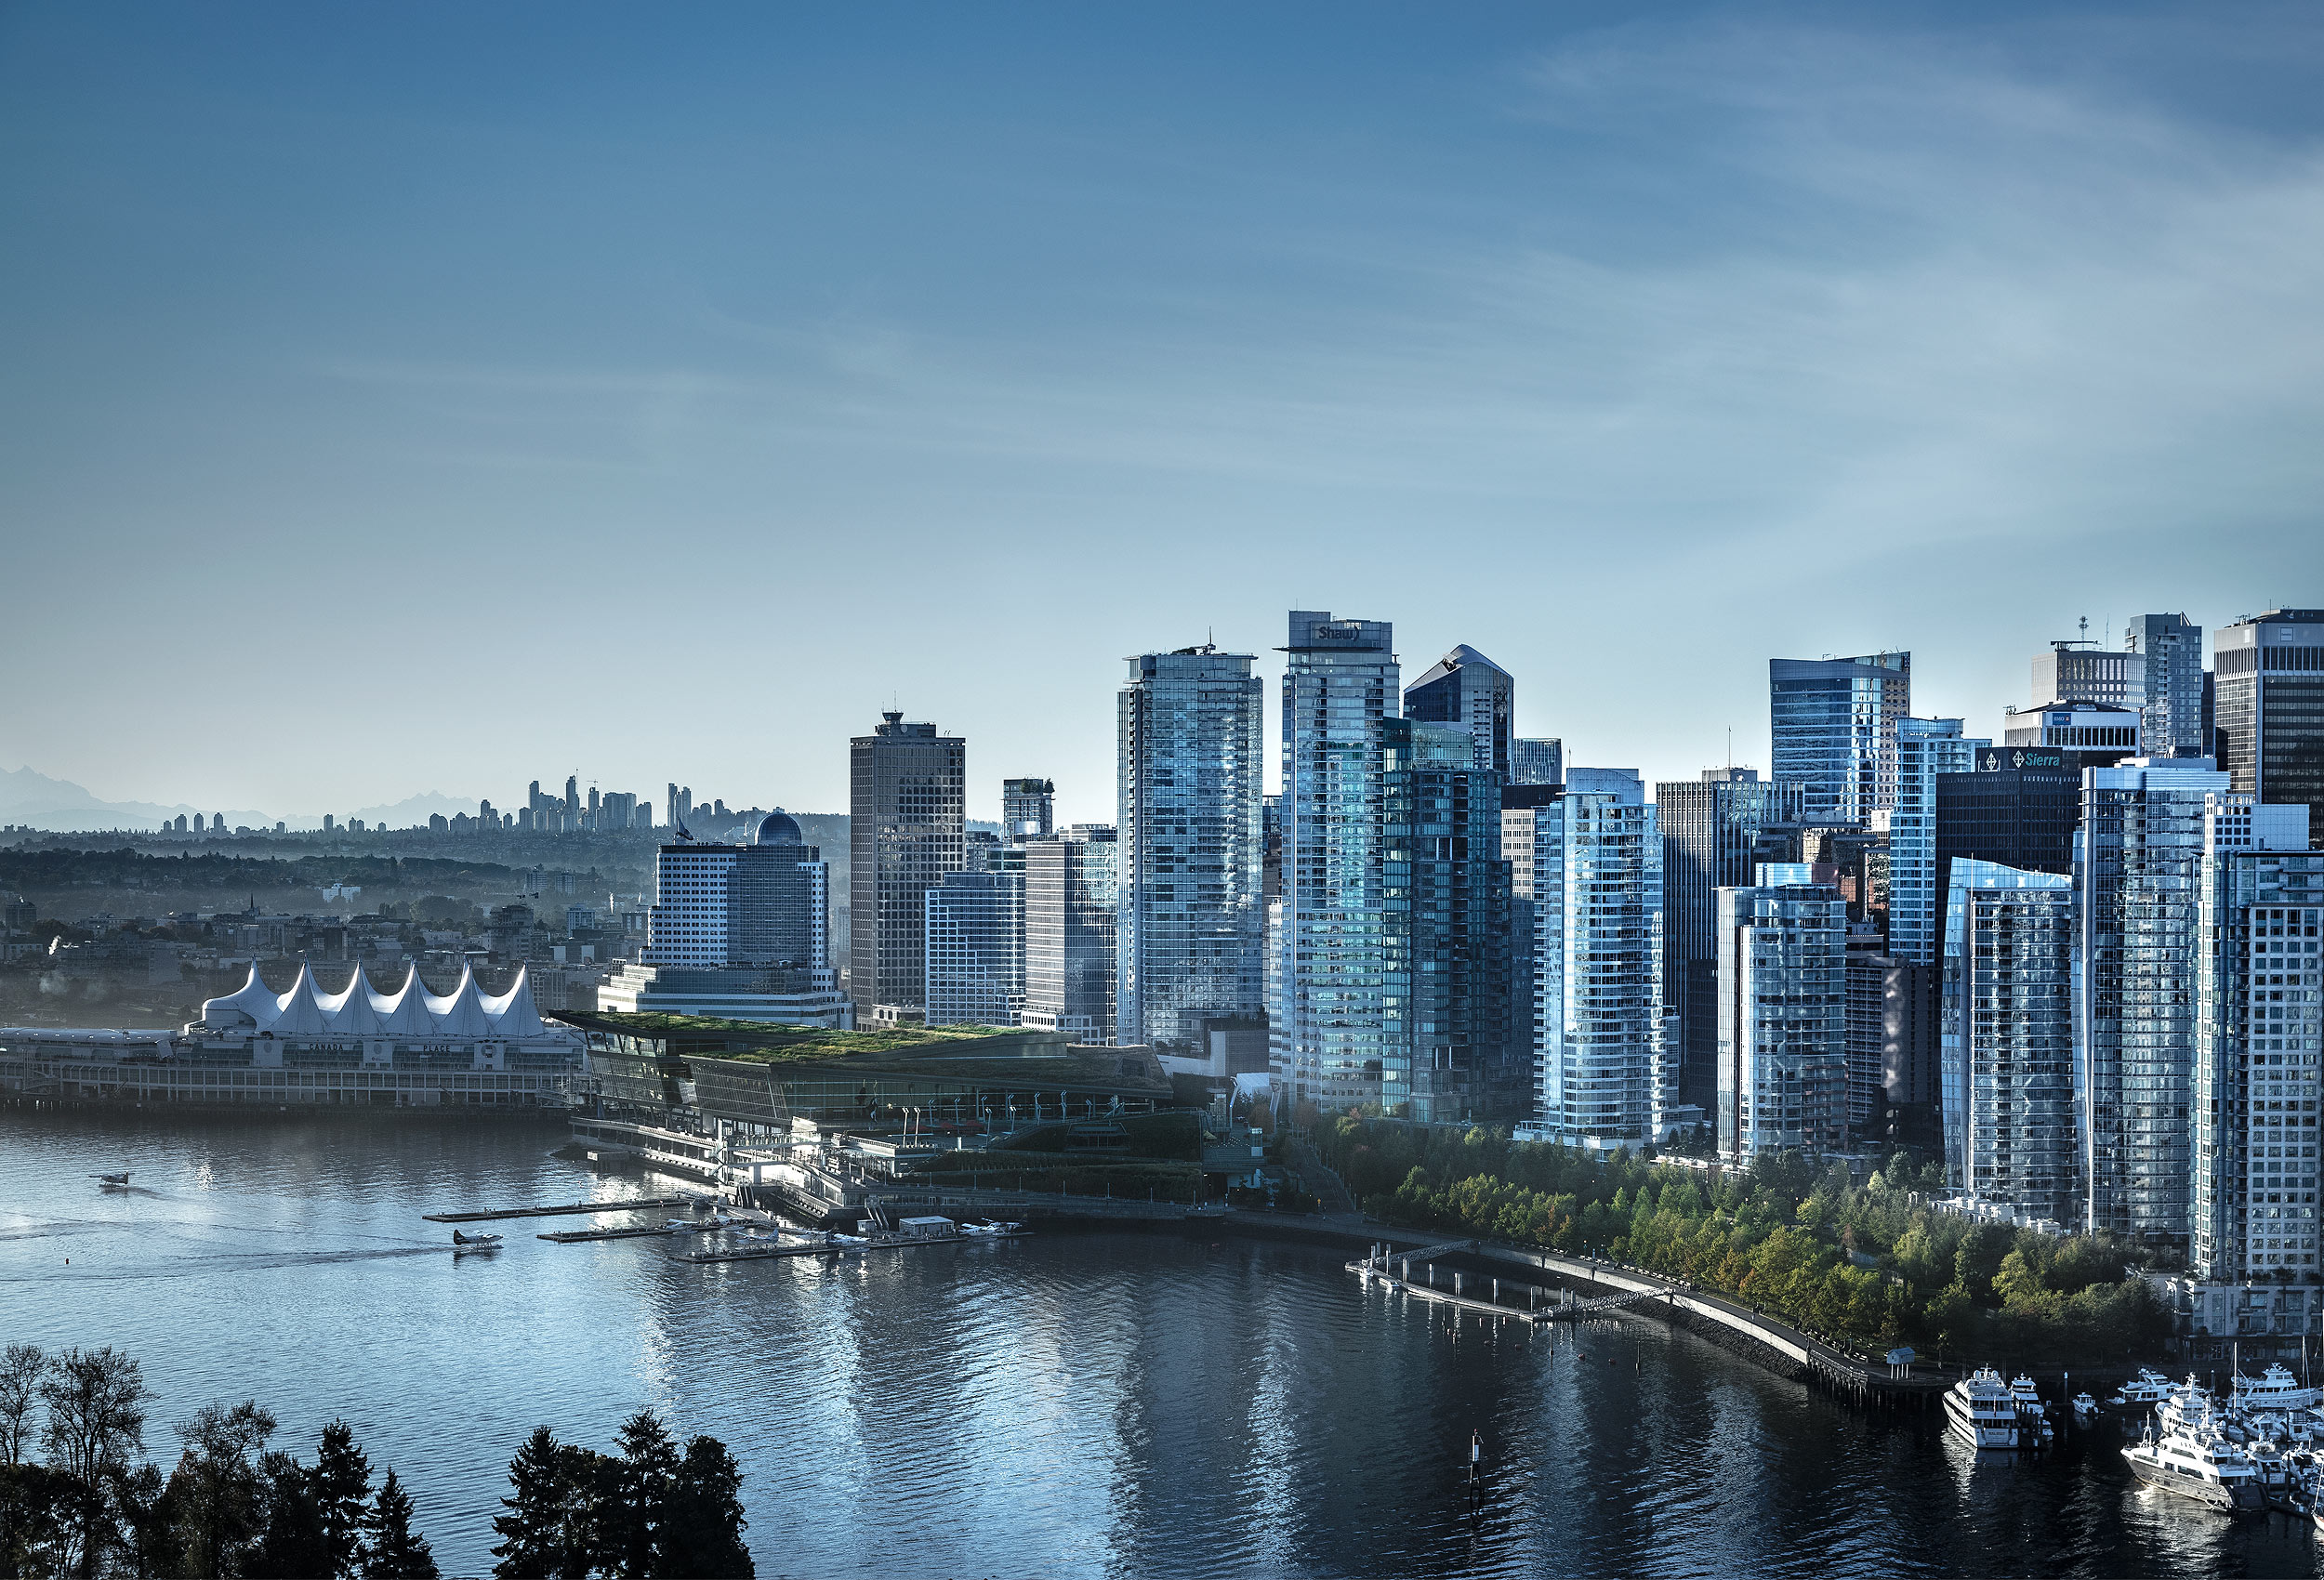 Coal Harbour by architectural photographer Kristopher Grunert